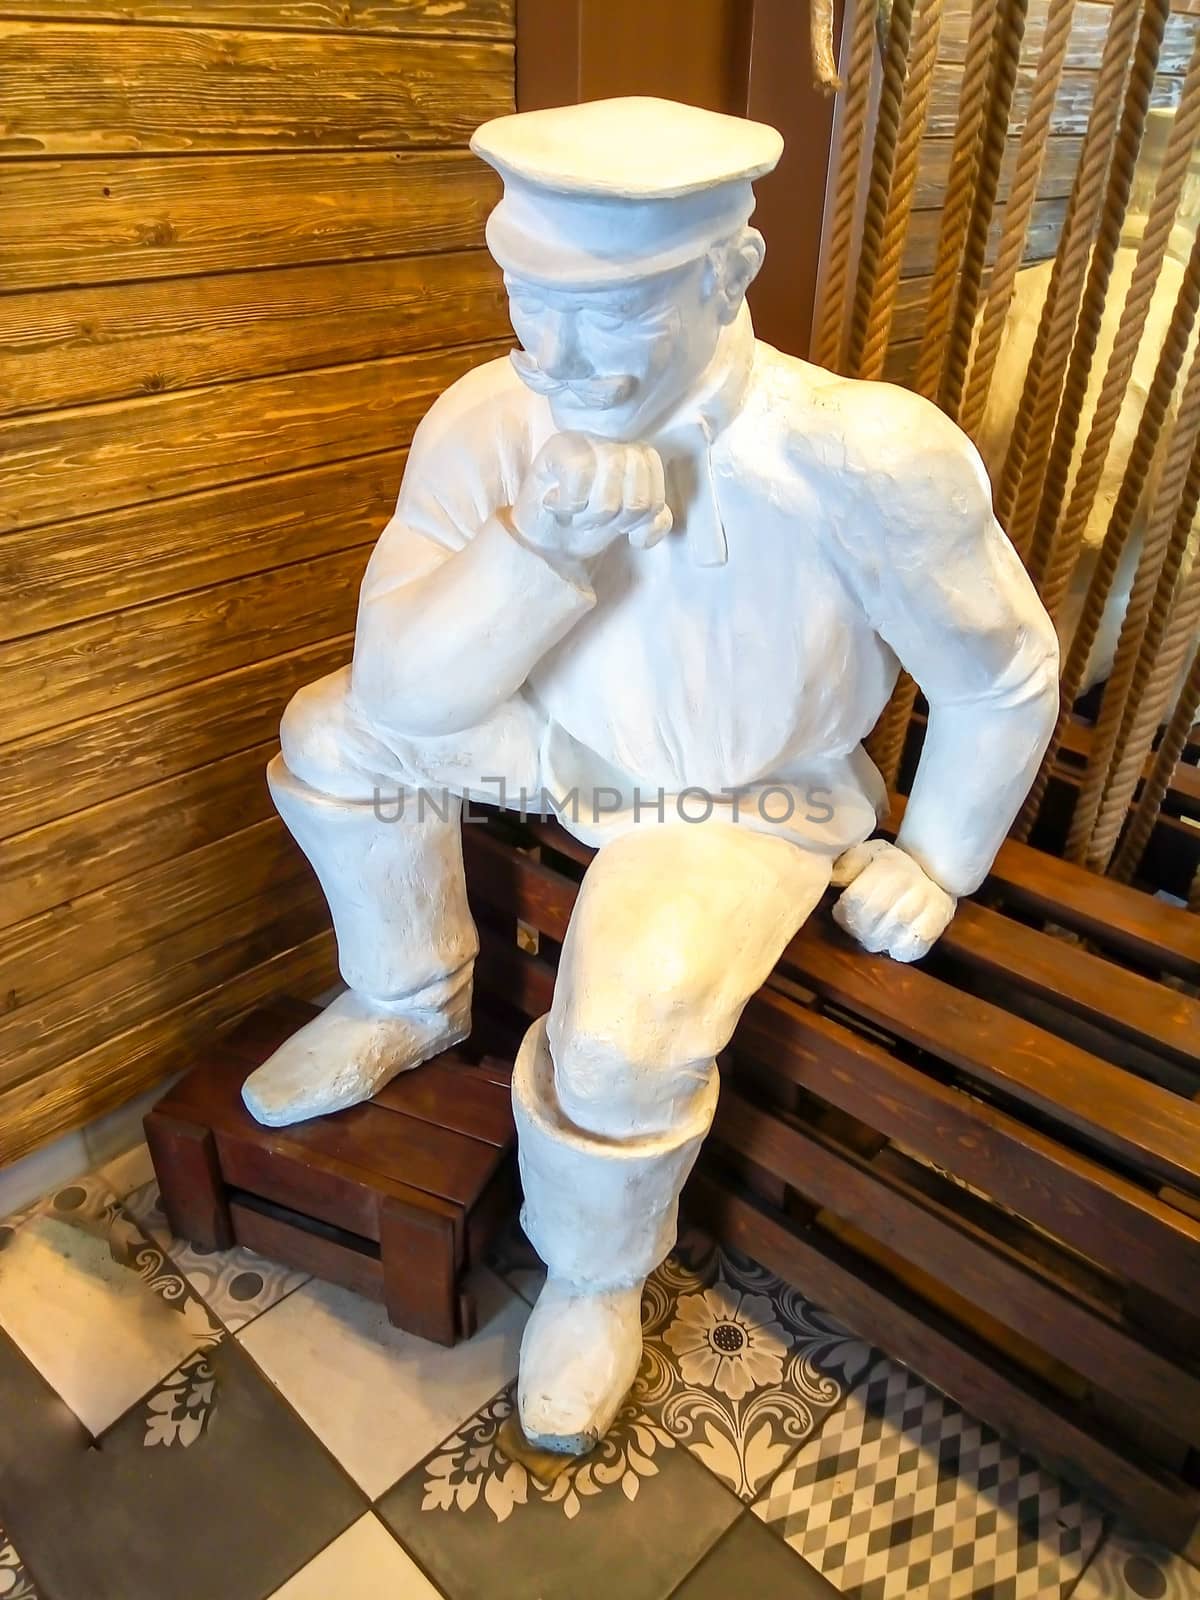 A white statue of a tired Miller sitting on a bench. Travel around the country